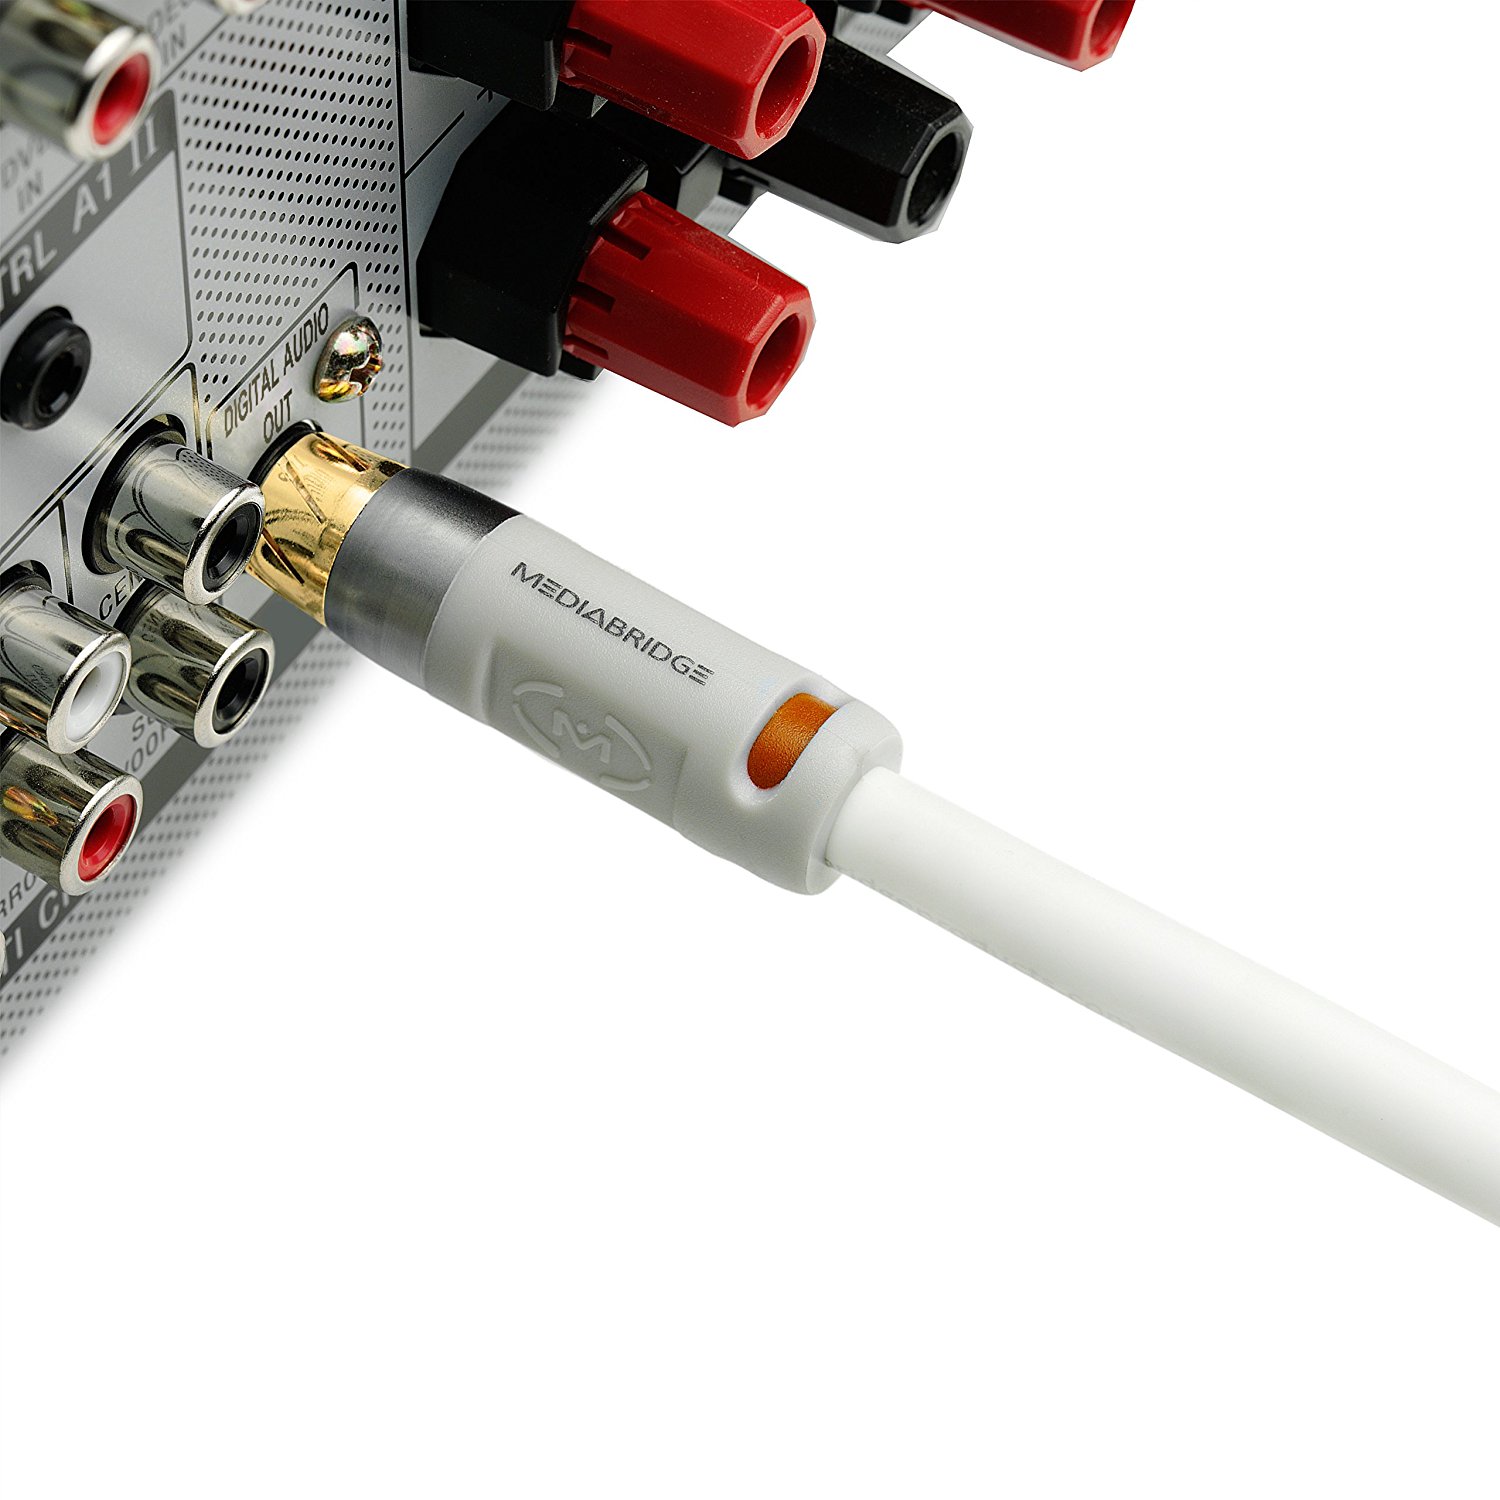 Mediabridge ULTRA Series Digital Audio Coaxial Cable (8 Feet) - Dual Shielded with RCA to RCA Gold-Plated Connectors - White - (Part# CJ08-6WR-G2 ) - image 4 of 4